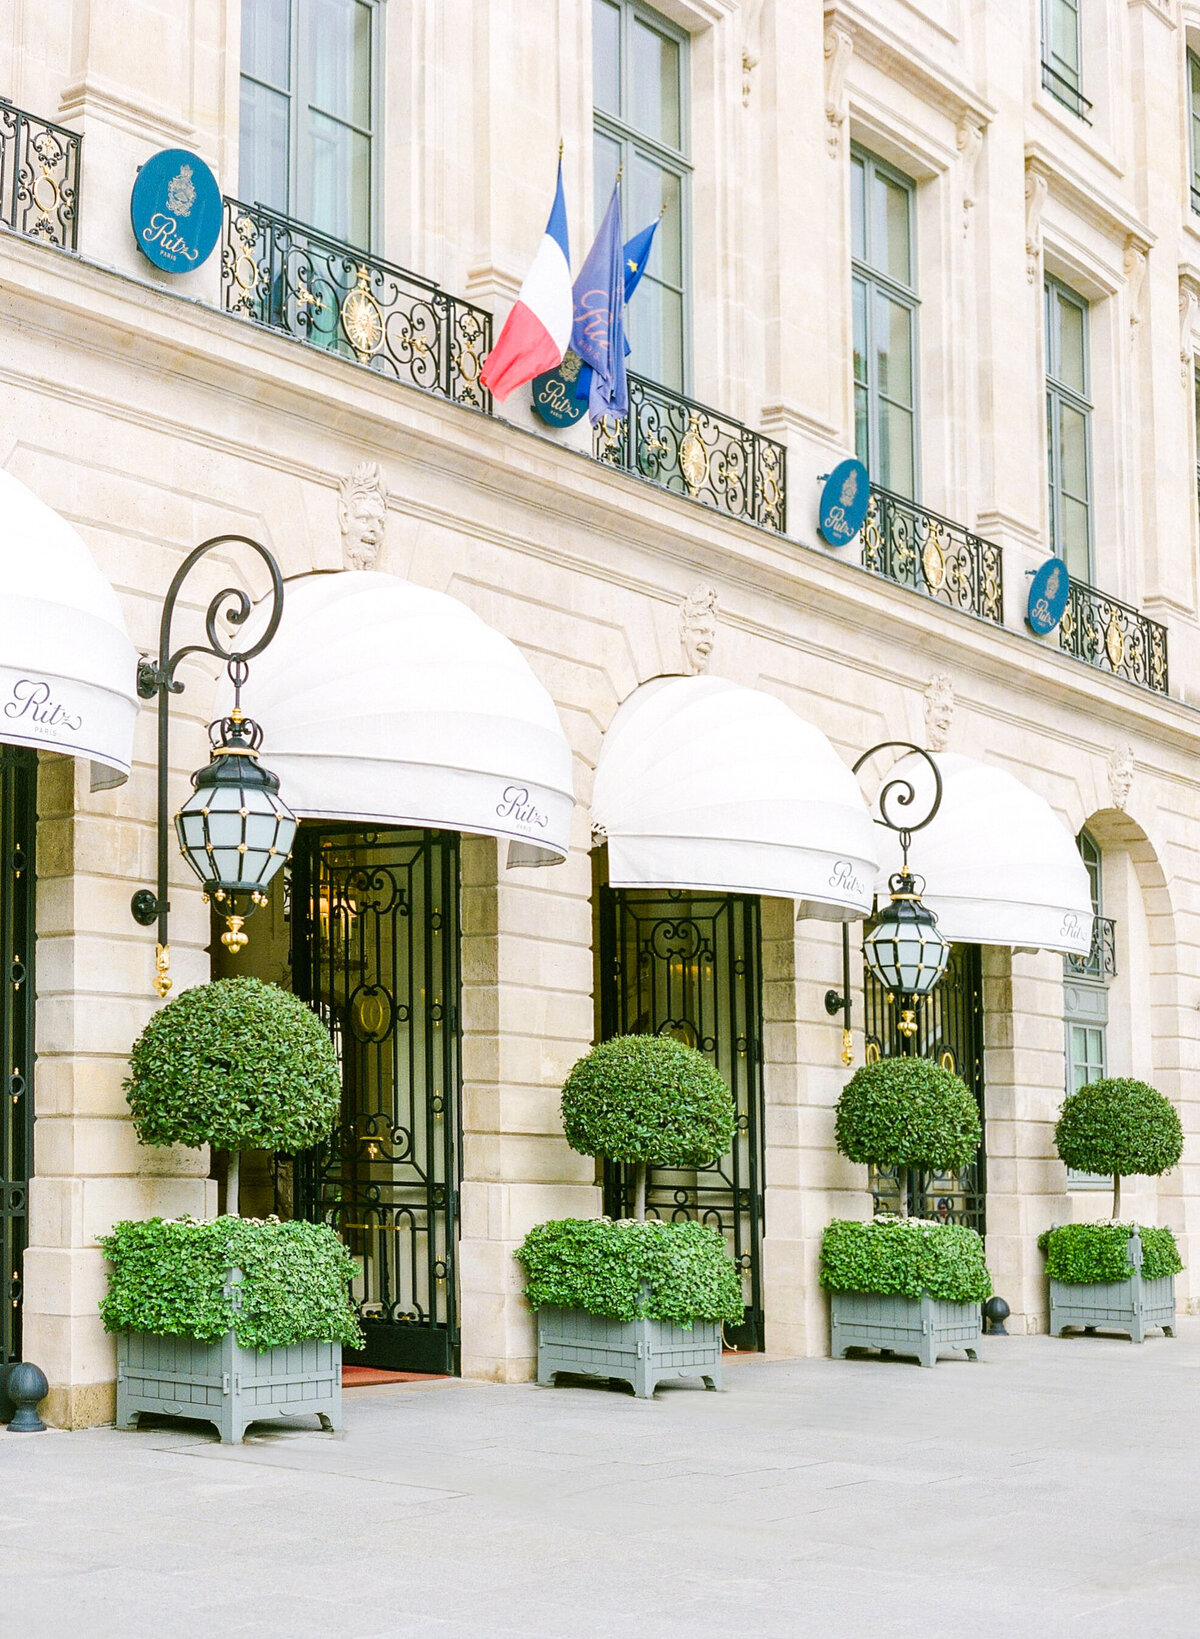 Jennifer Fox Weddings English speaking wedding planning & design agency in France crafting refined and bespoke weddings and celebrations Provence, Paris and destination Le_Ritz_Paris_©_Oliver_Fly_Photography_9